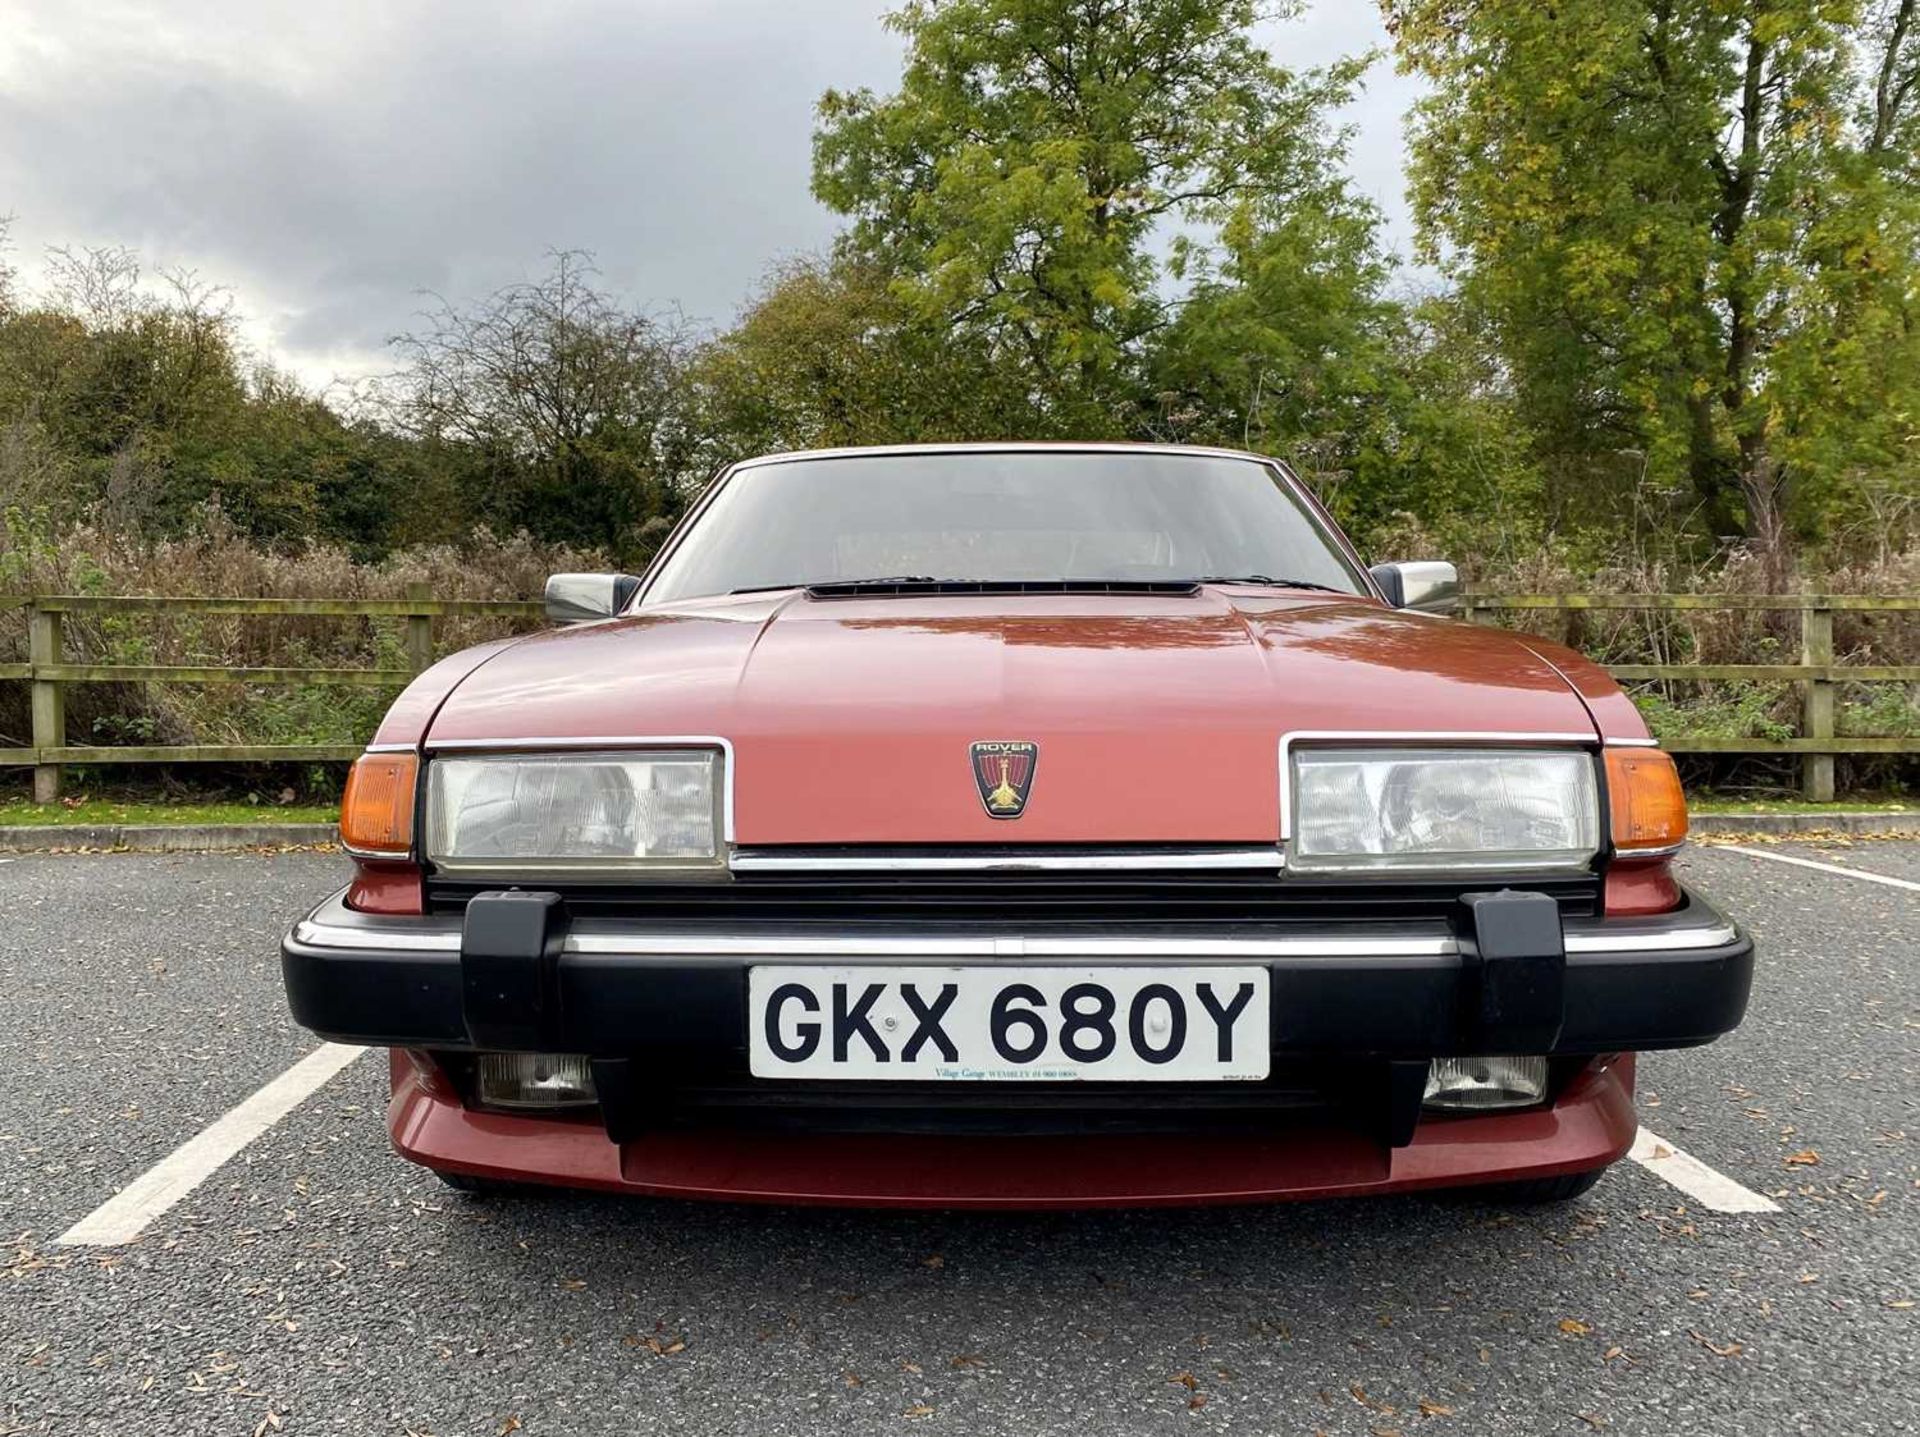 1982 Rover SD1 3500 SE Only 29,000 miles - Image 13 of 100